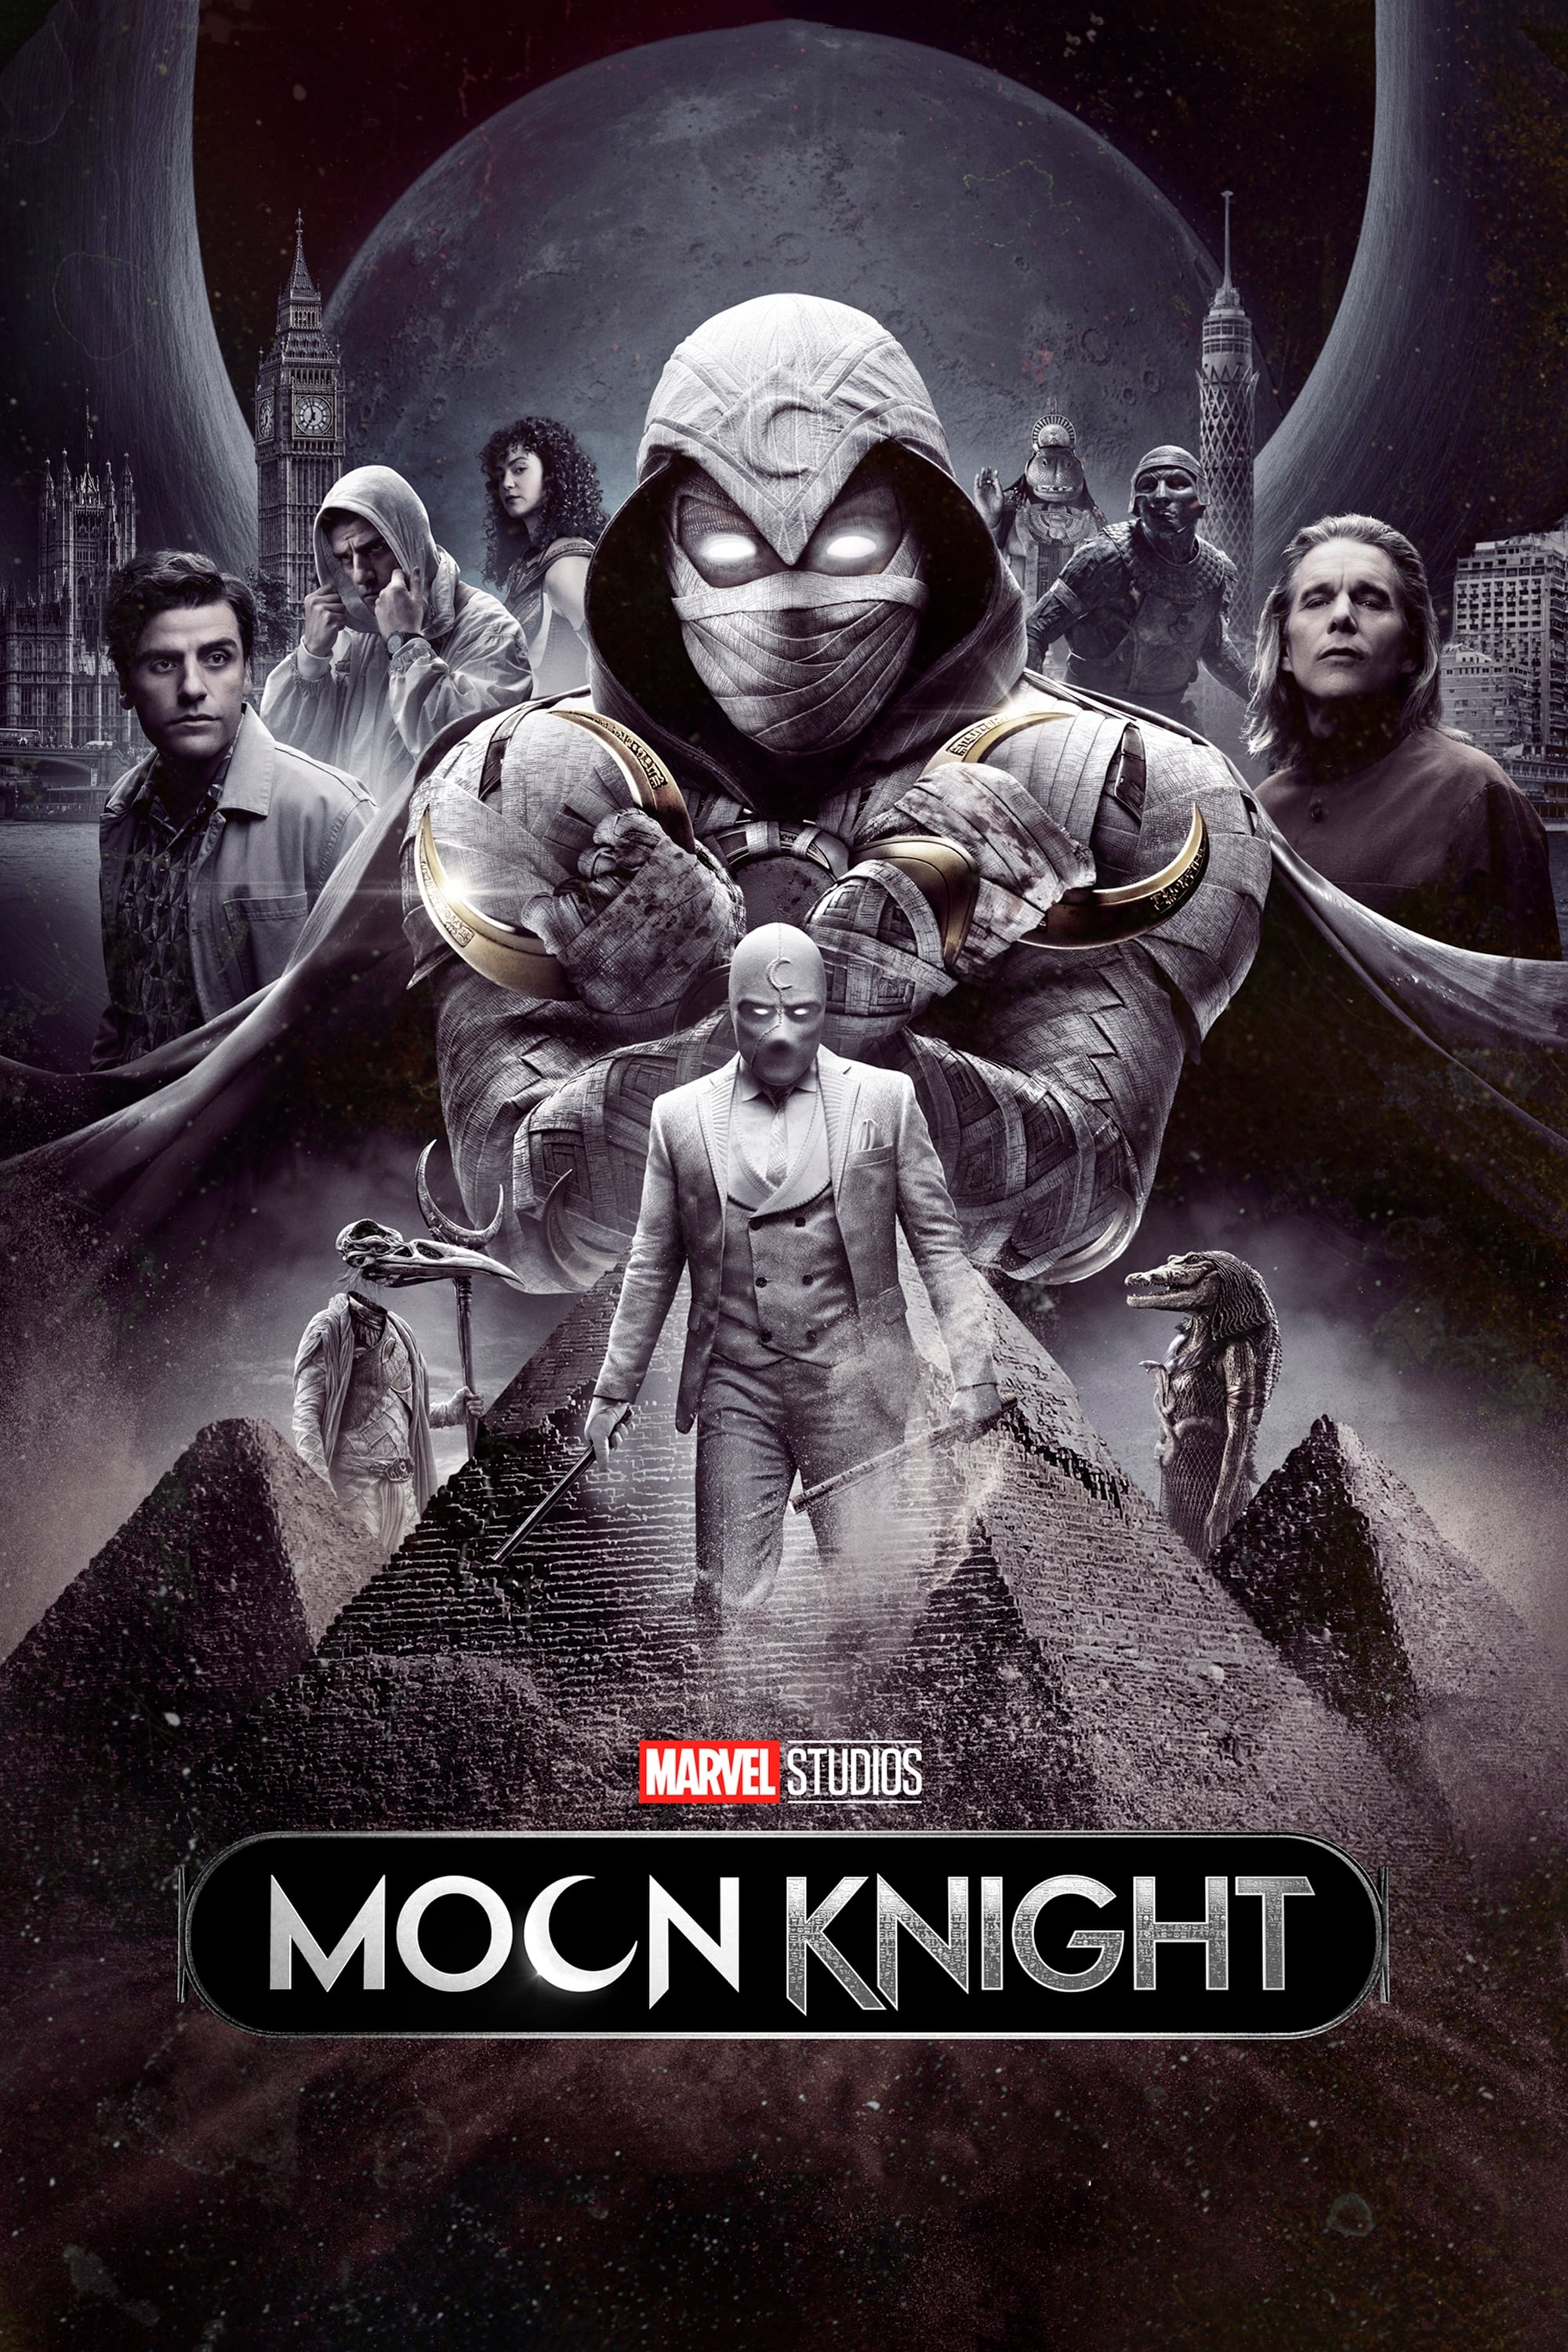 Moon Knight TV Shows About Marvel Cinematic Universe